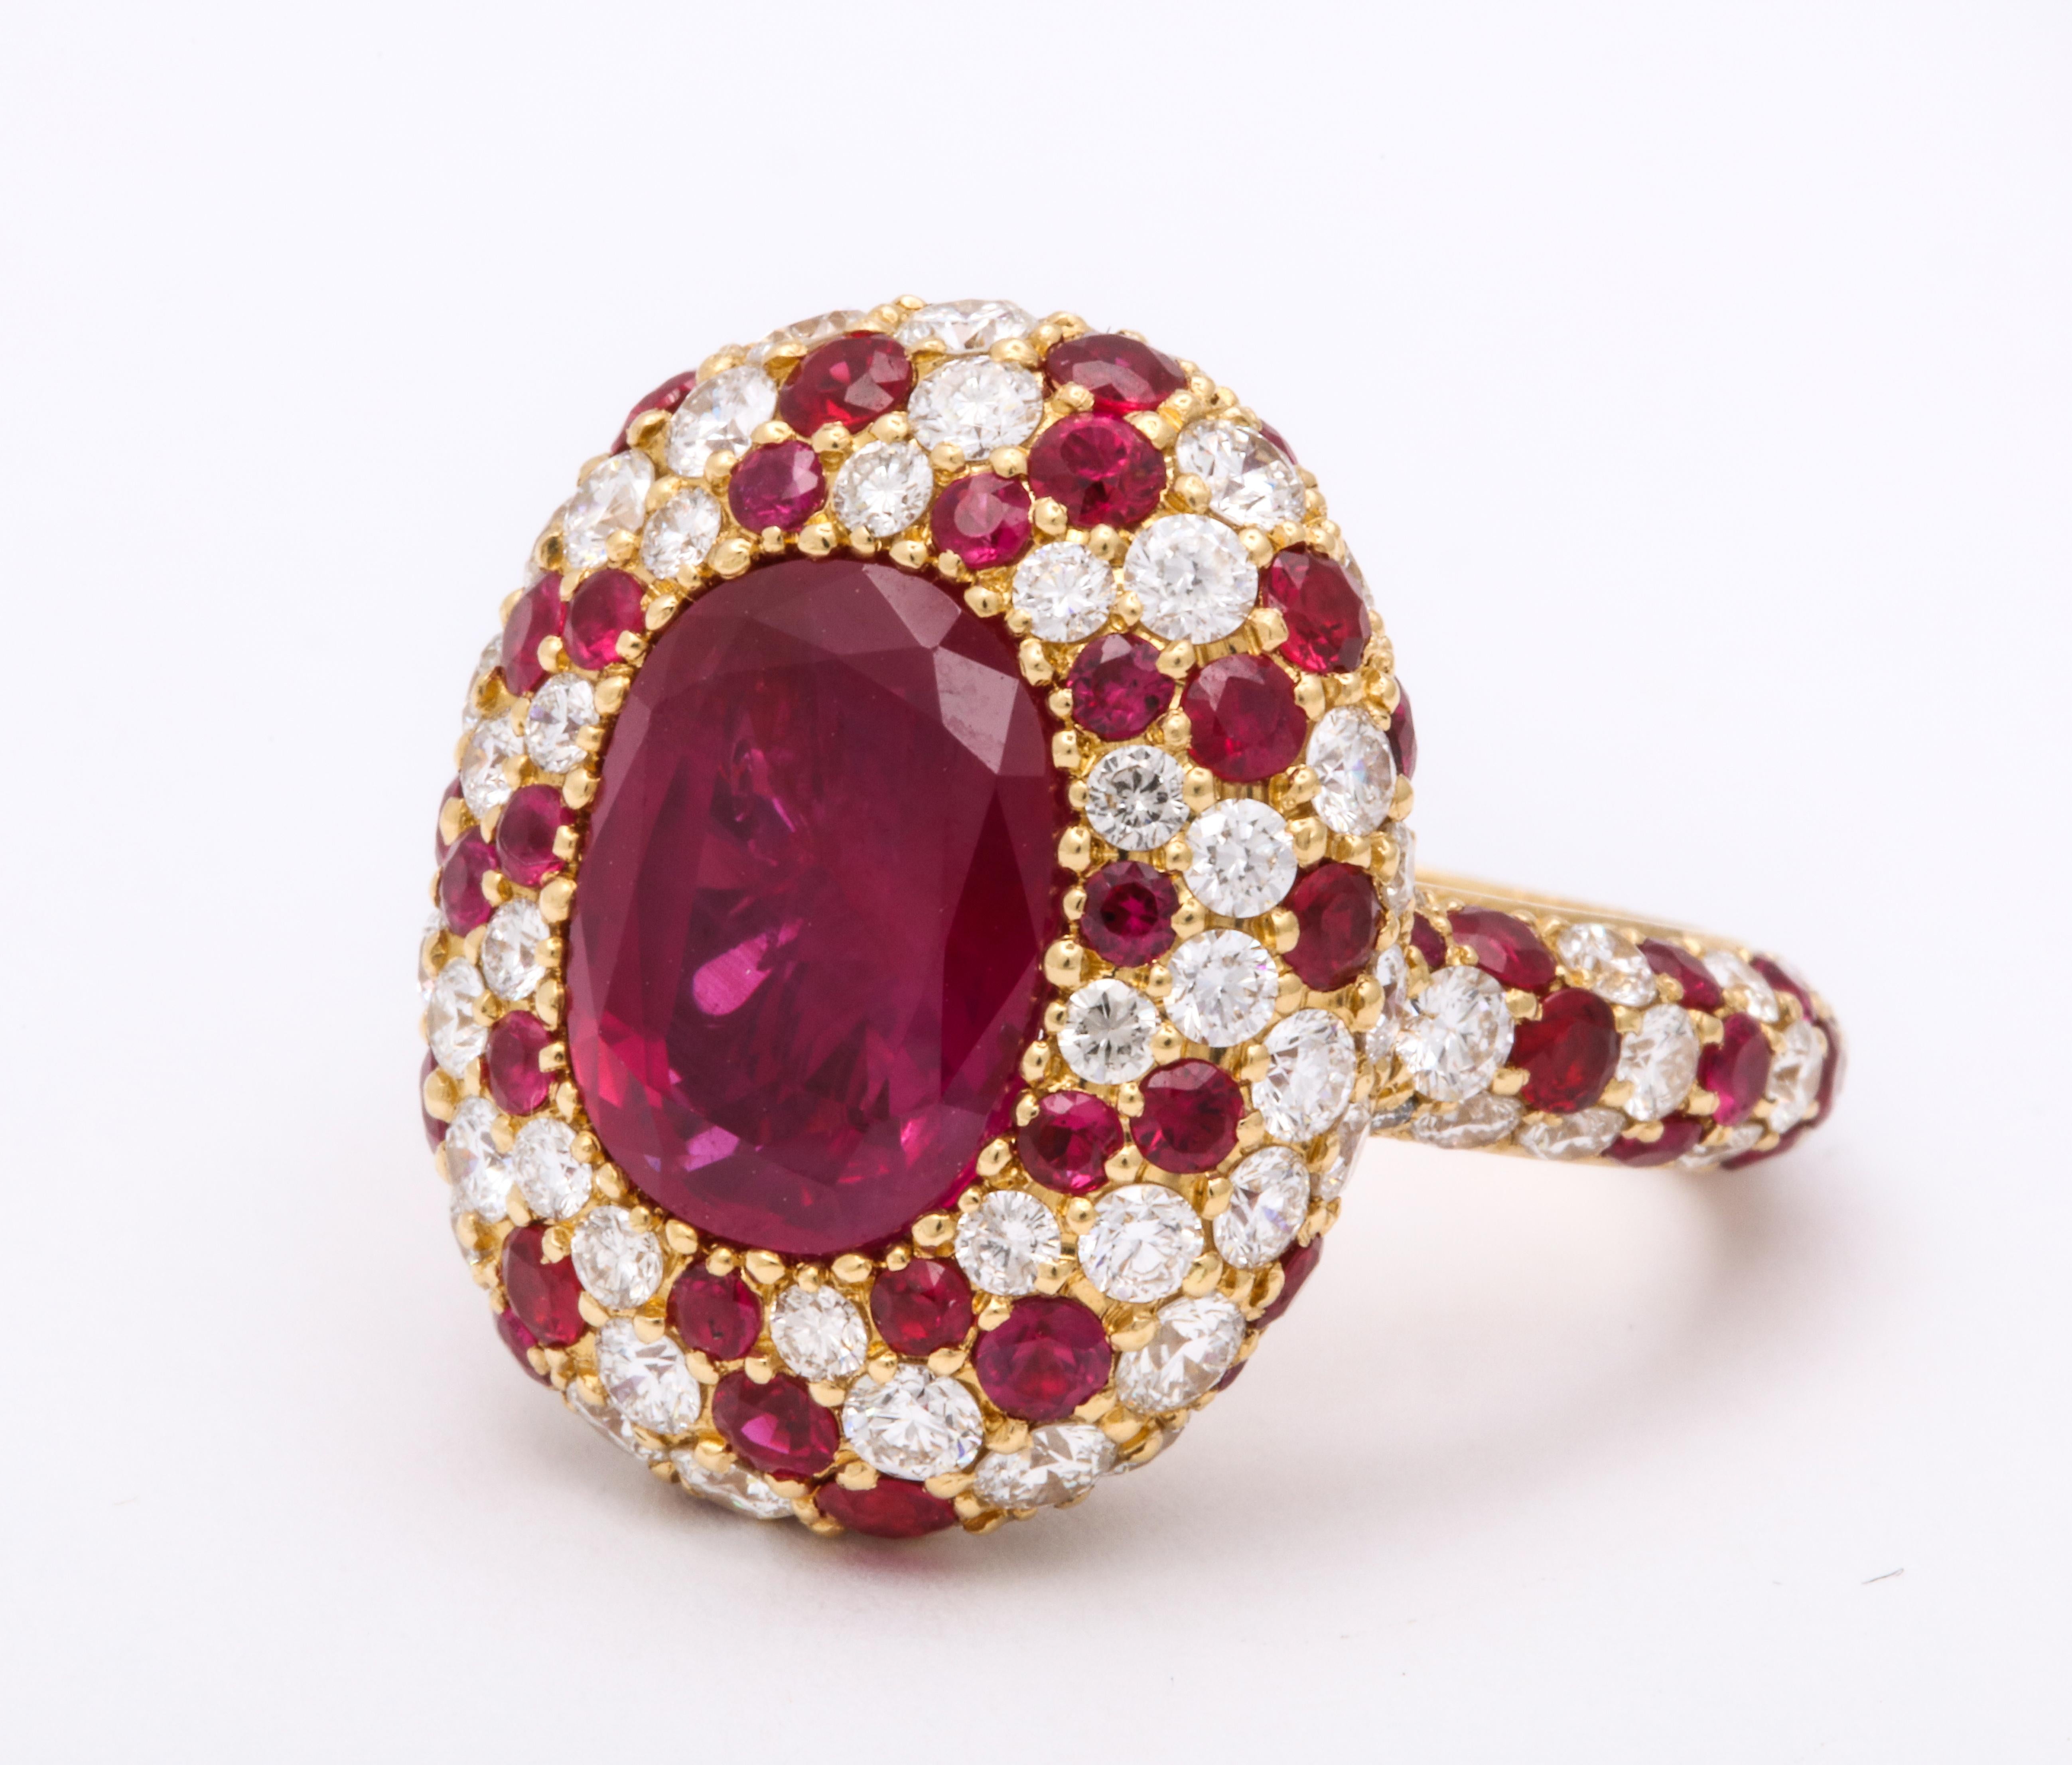 Women's or Men's Fine Non-Heated Burma Ruby Ring Set with Diamonds and Rubies